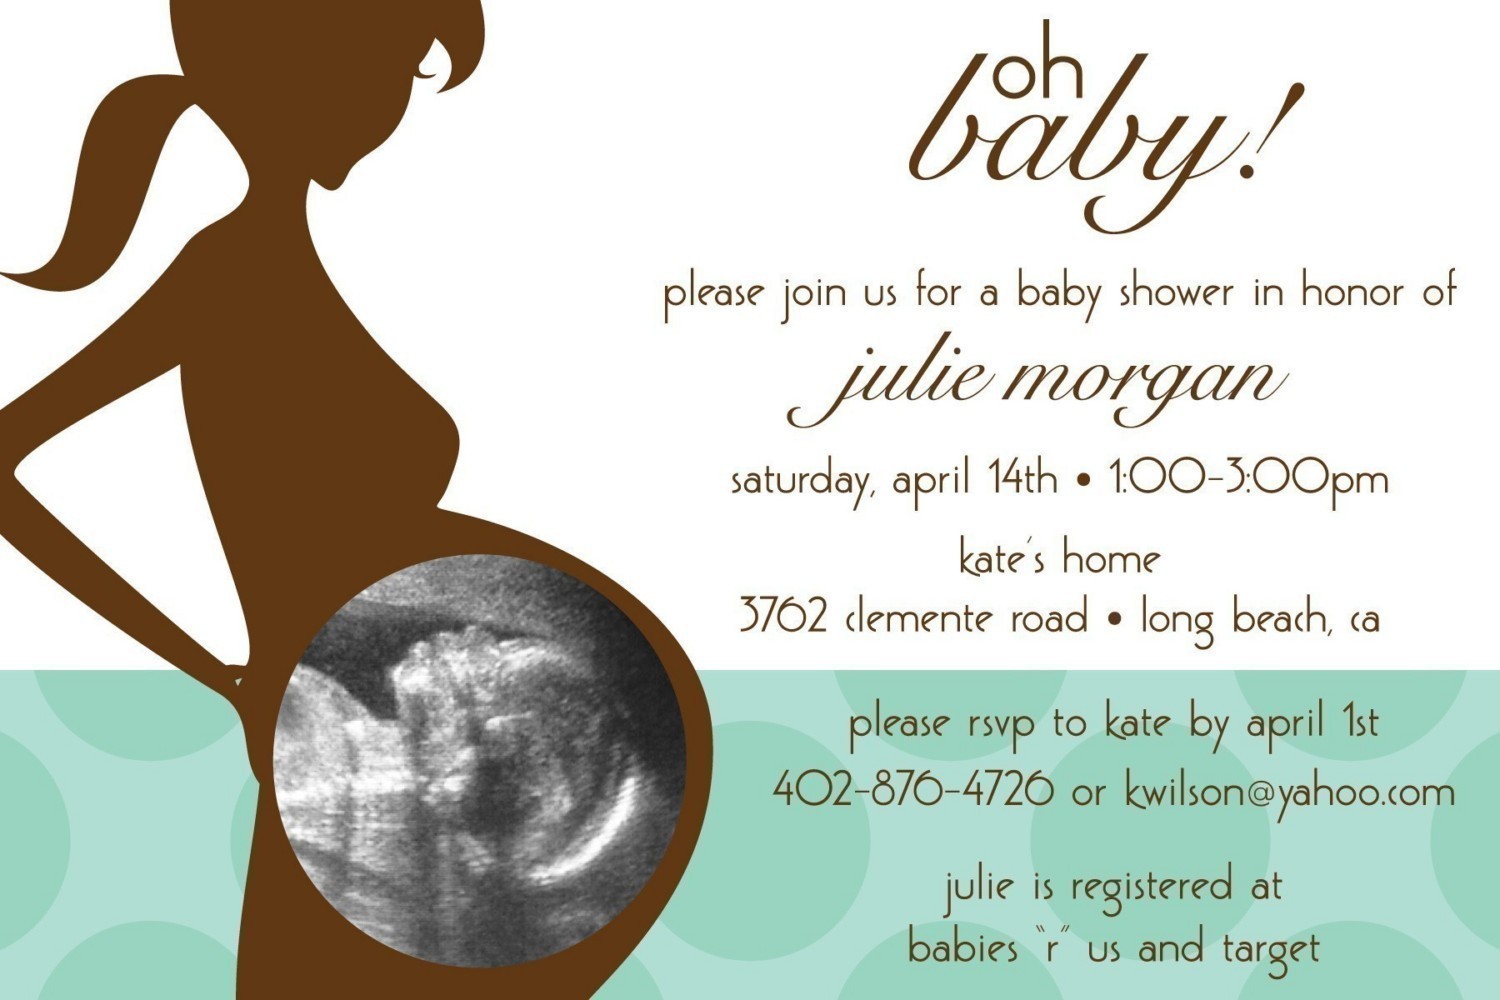 Full Size of Baby Shower:delightful Baby Shower Invitation Wording Picture Designs Designs Inexpensive Baby Shower Invite Wording At Work With Hd Full Size Of Designsinexpensive Baby Shower Invite Wording At Work With Hd Awesome Yellow